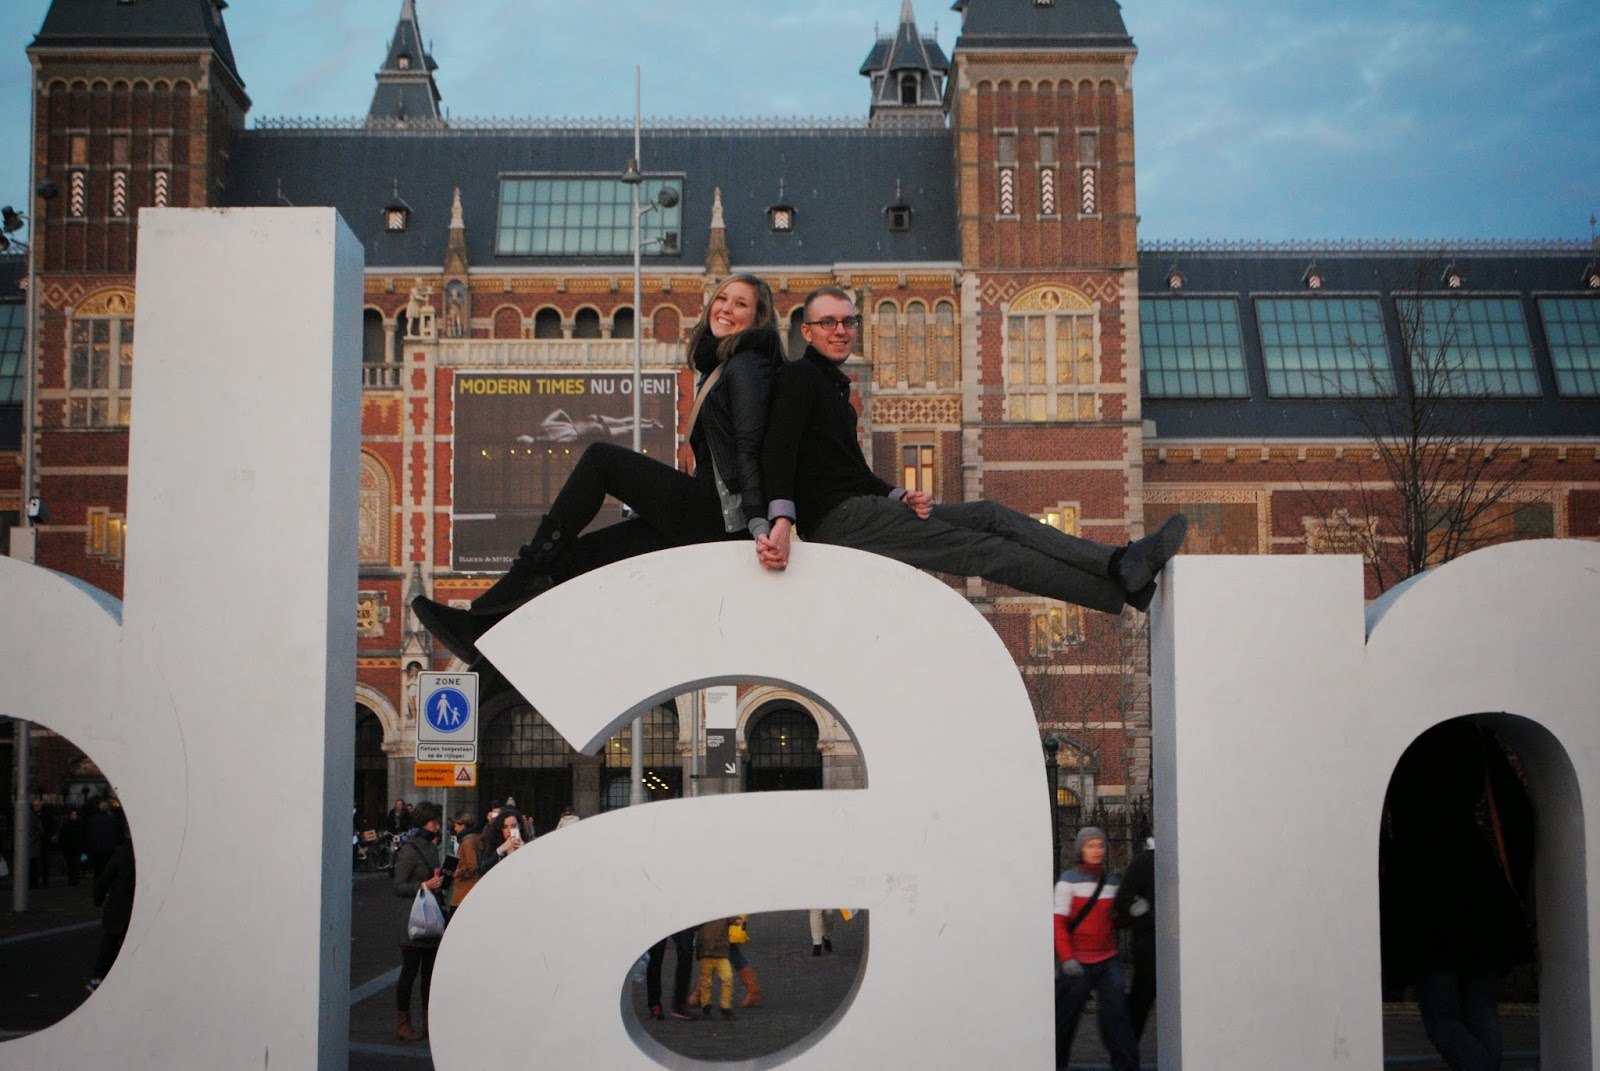 Erinn and Ben sit on top of the iconic 'I amsterdam' sign.